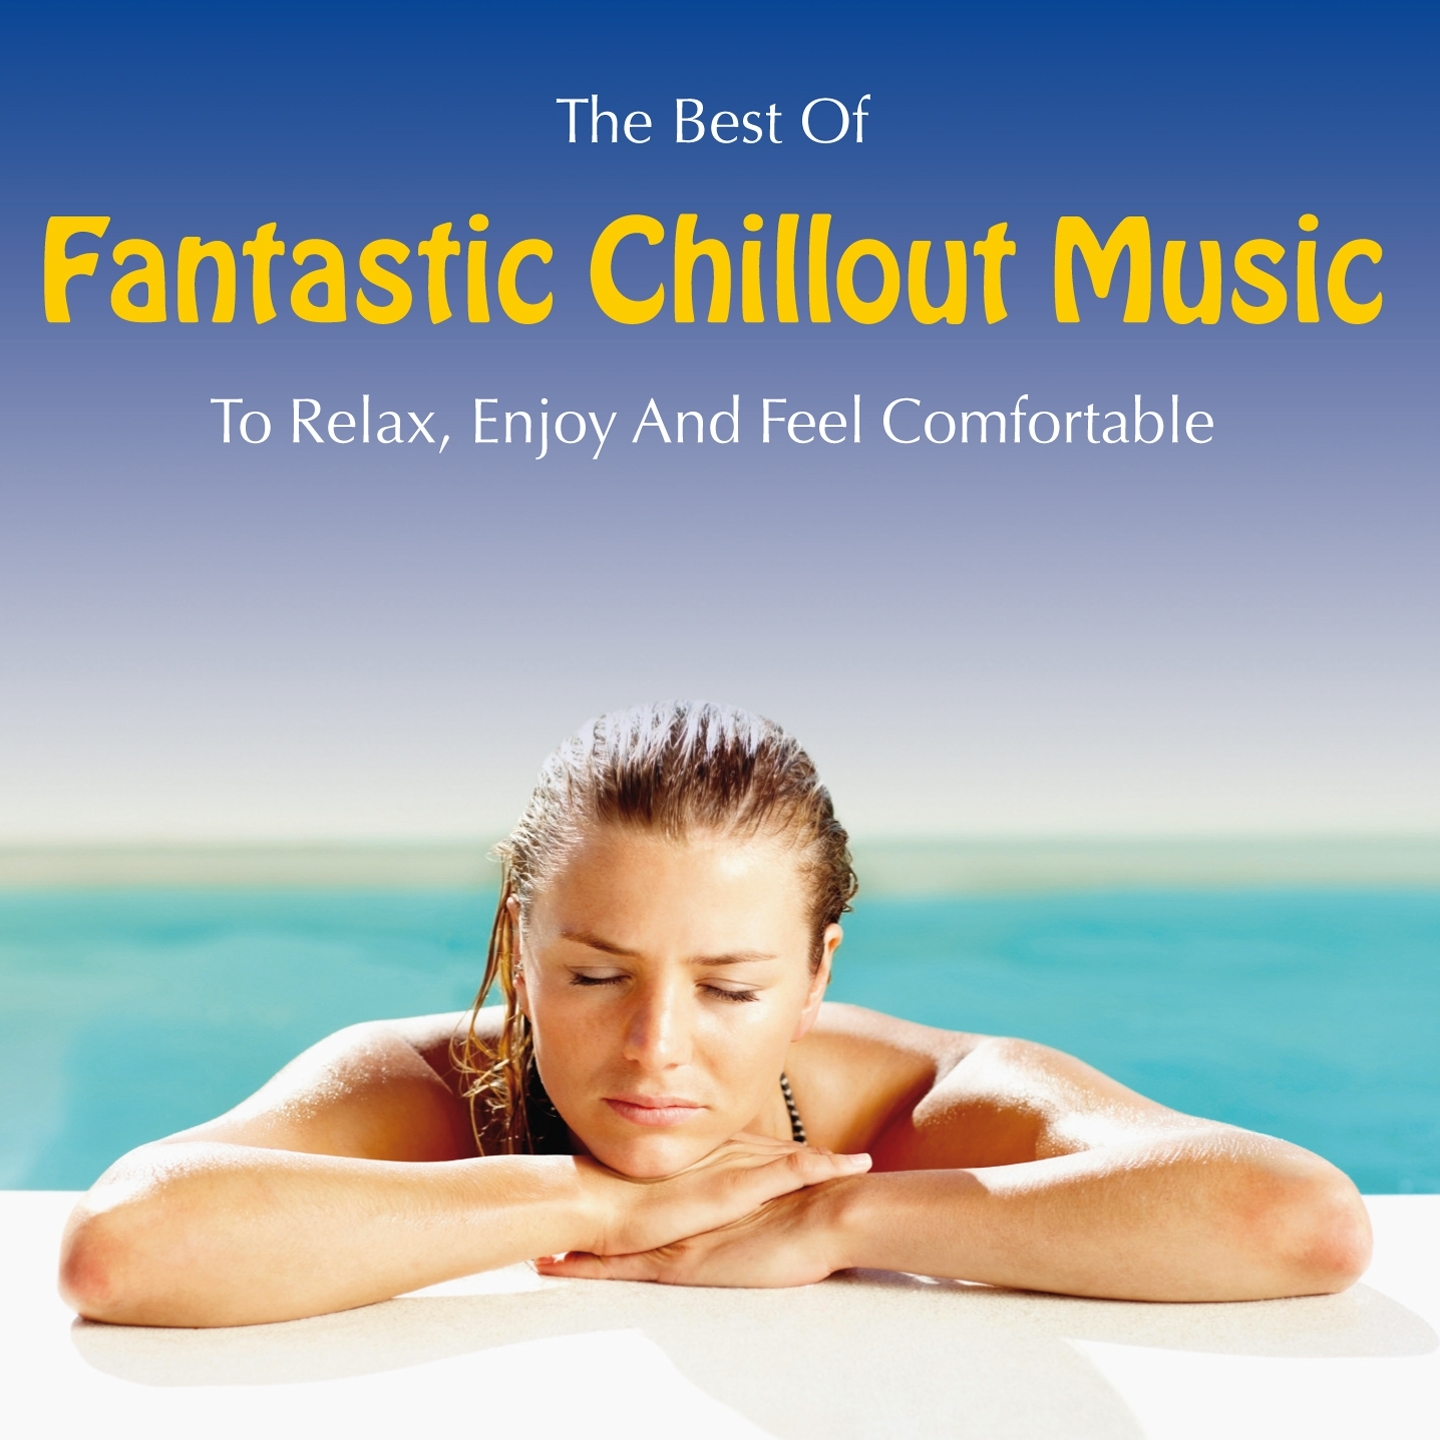 Fantastic Chillout Music: To Relax, Enjoy and Feel Comfortable